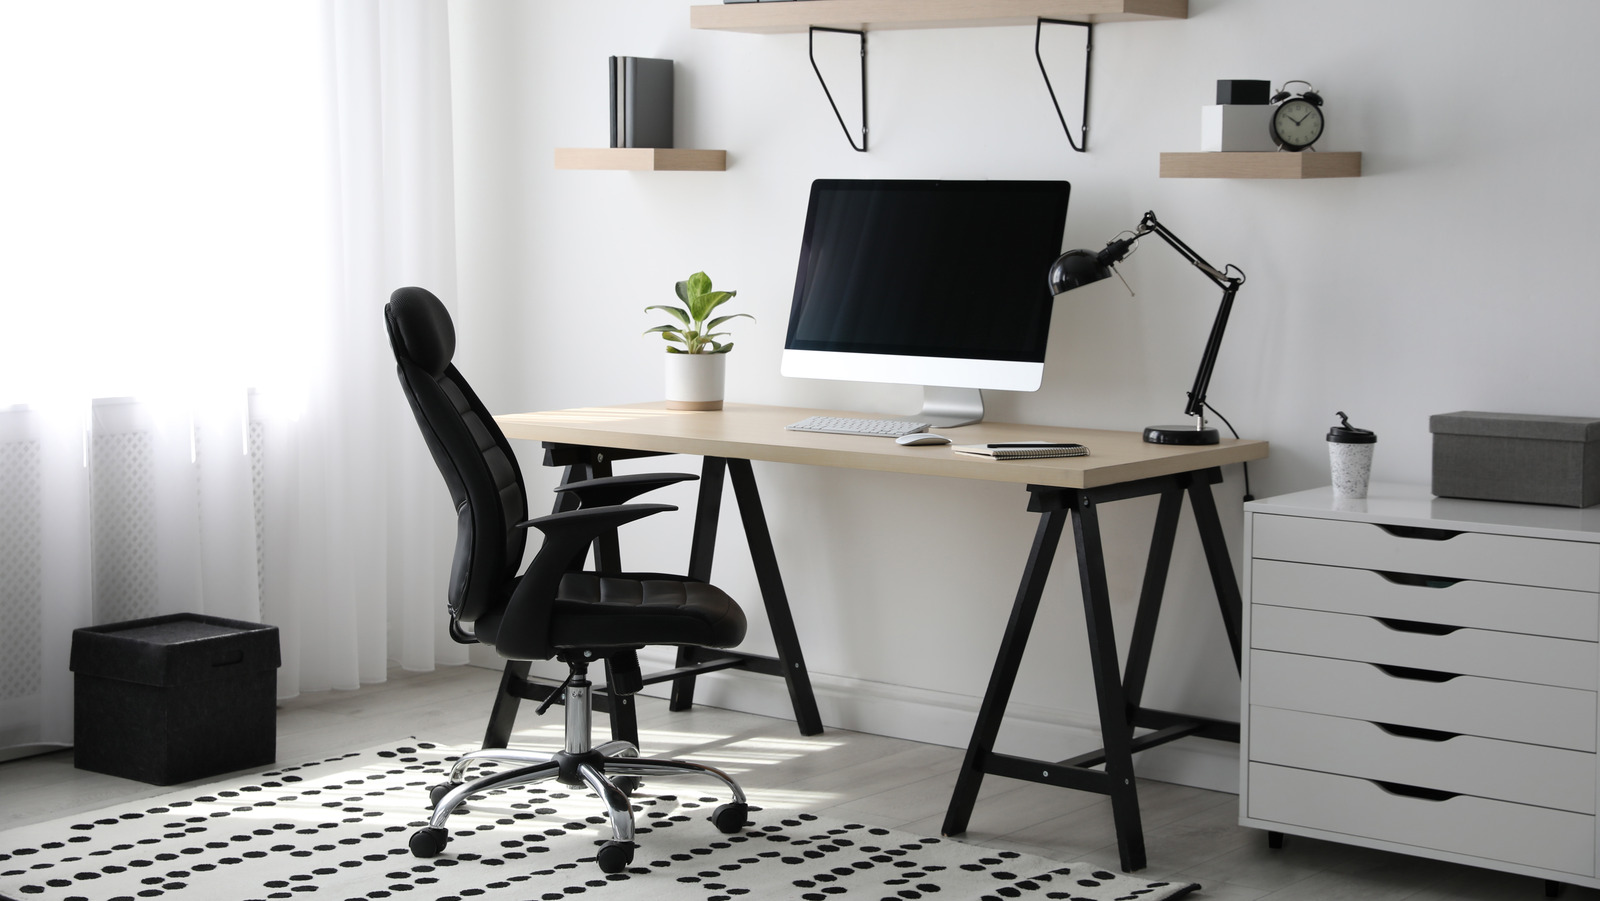 The Best Desk For Your Home Office That You Can Buy Online